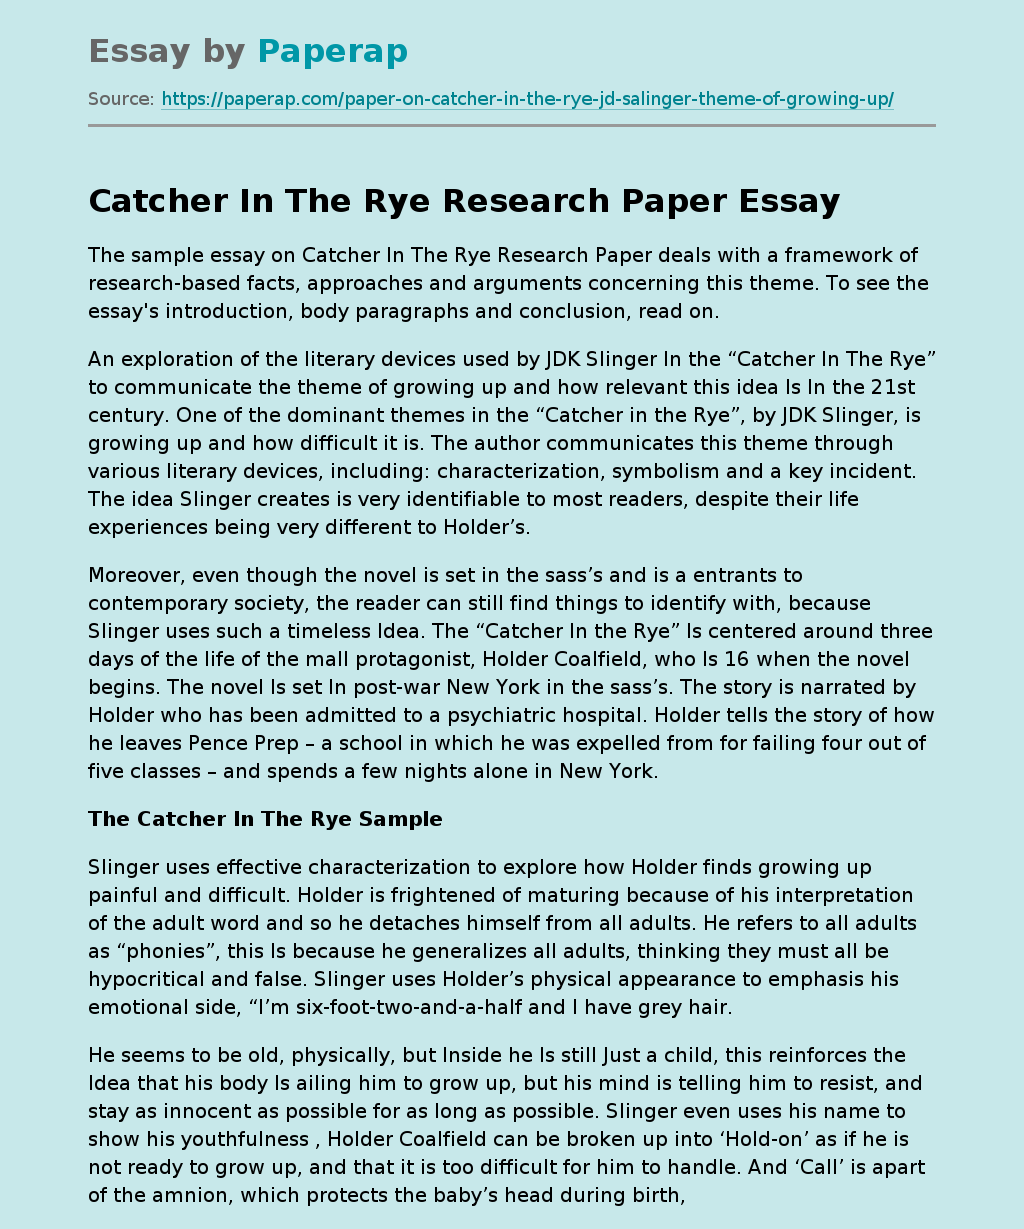 Catcher In The Rye Research Paper